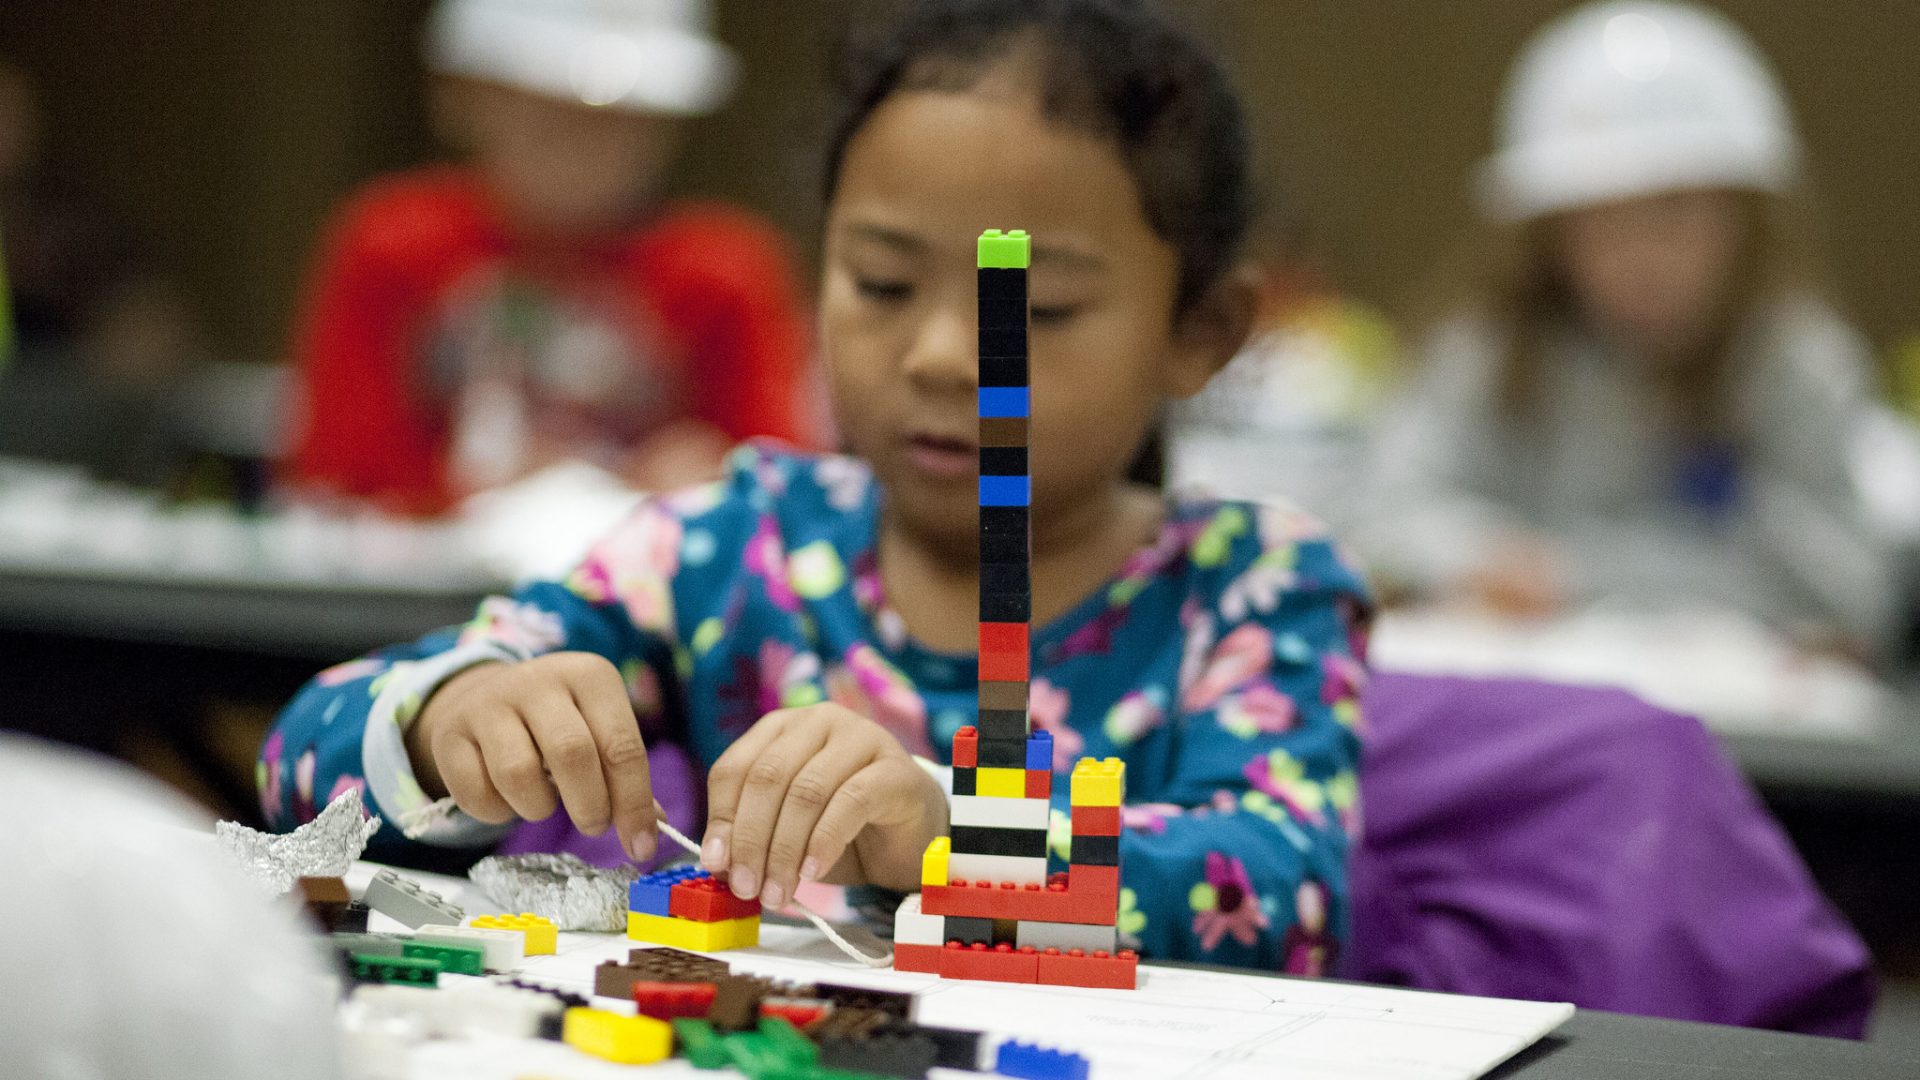 A little girl plays with legos at a table.